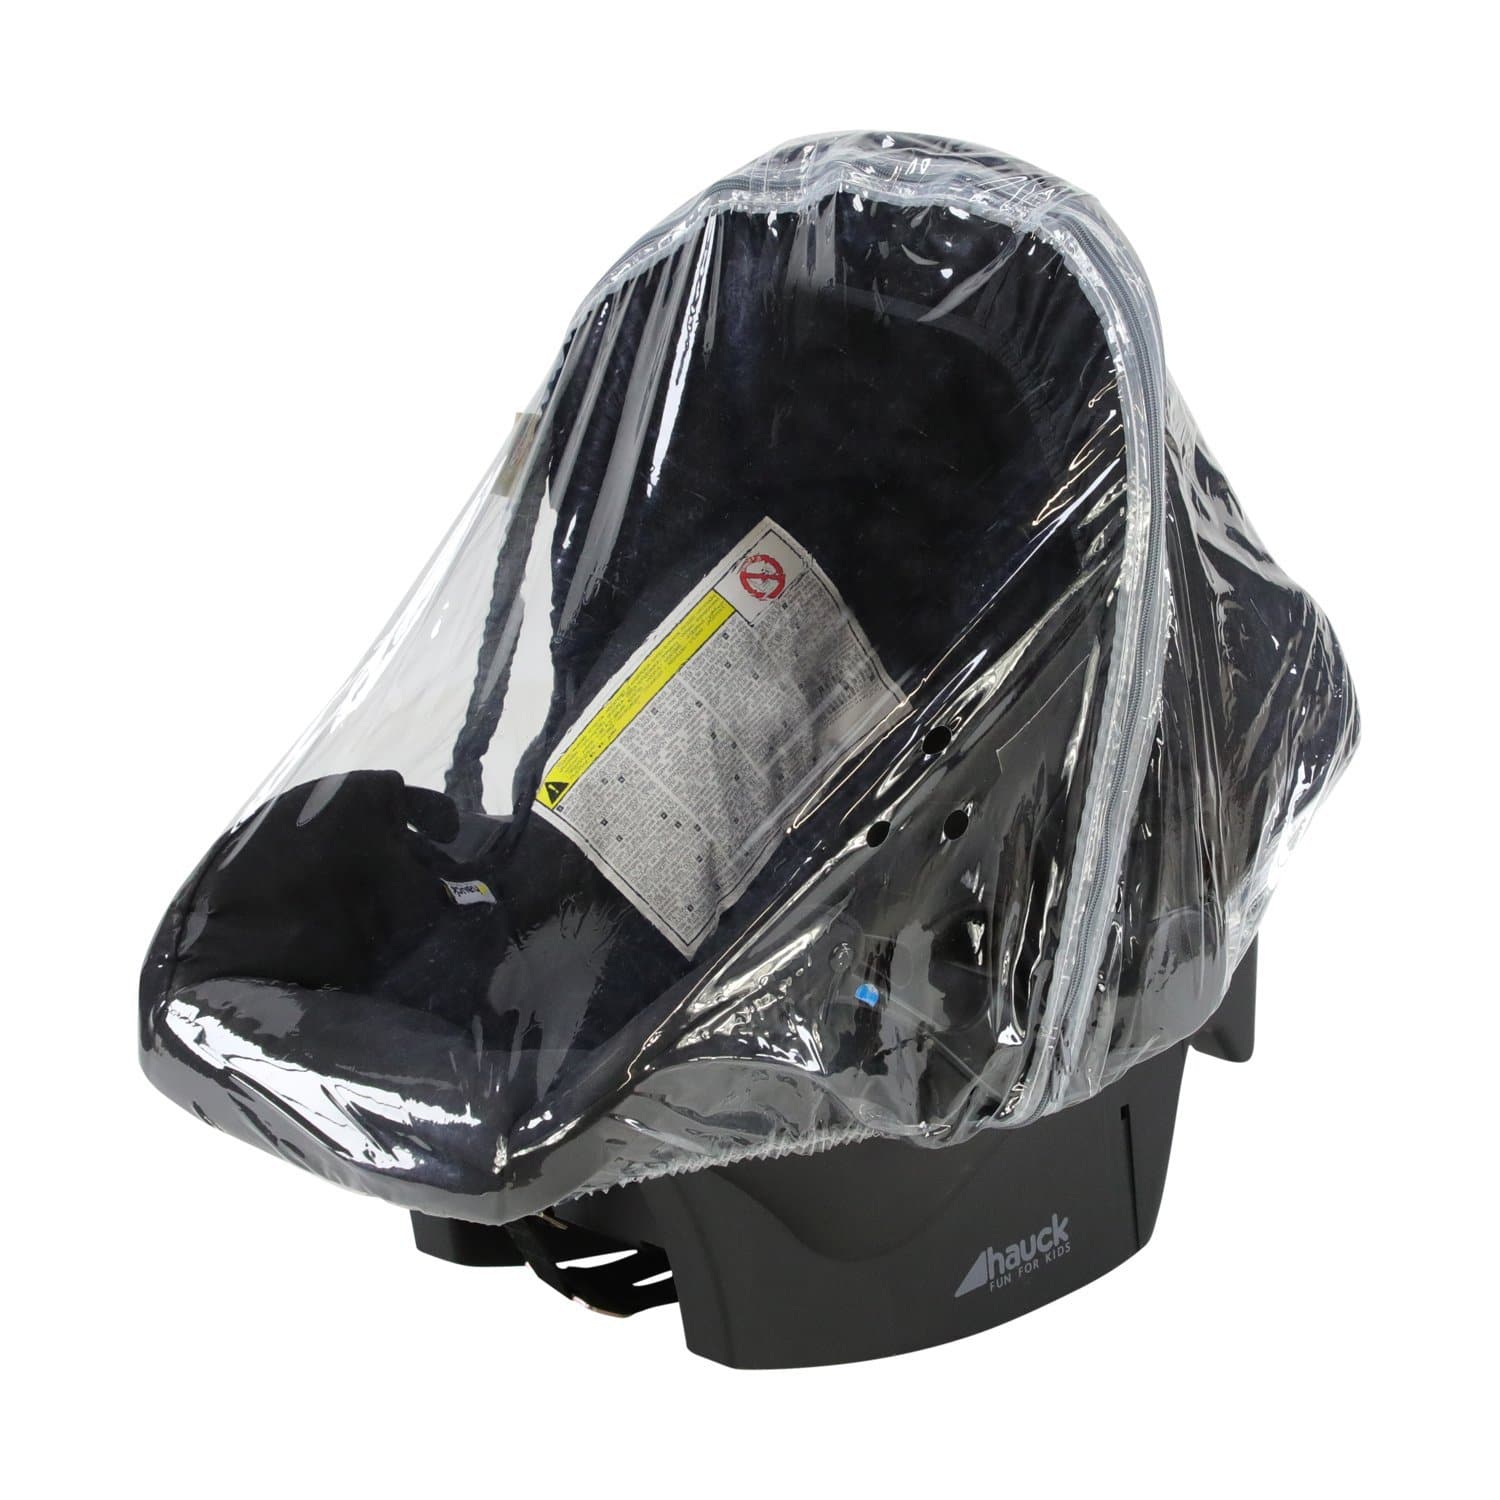 Car Seat Raincover Compatible with Maxi-Cosi - For Your Little One